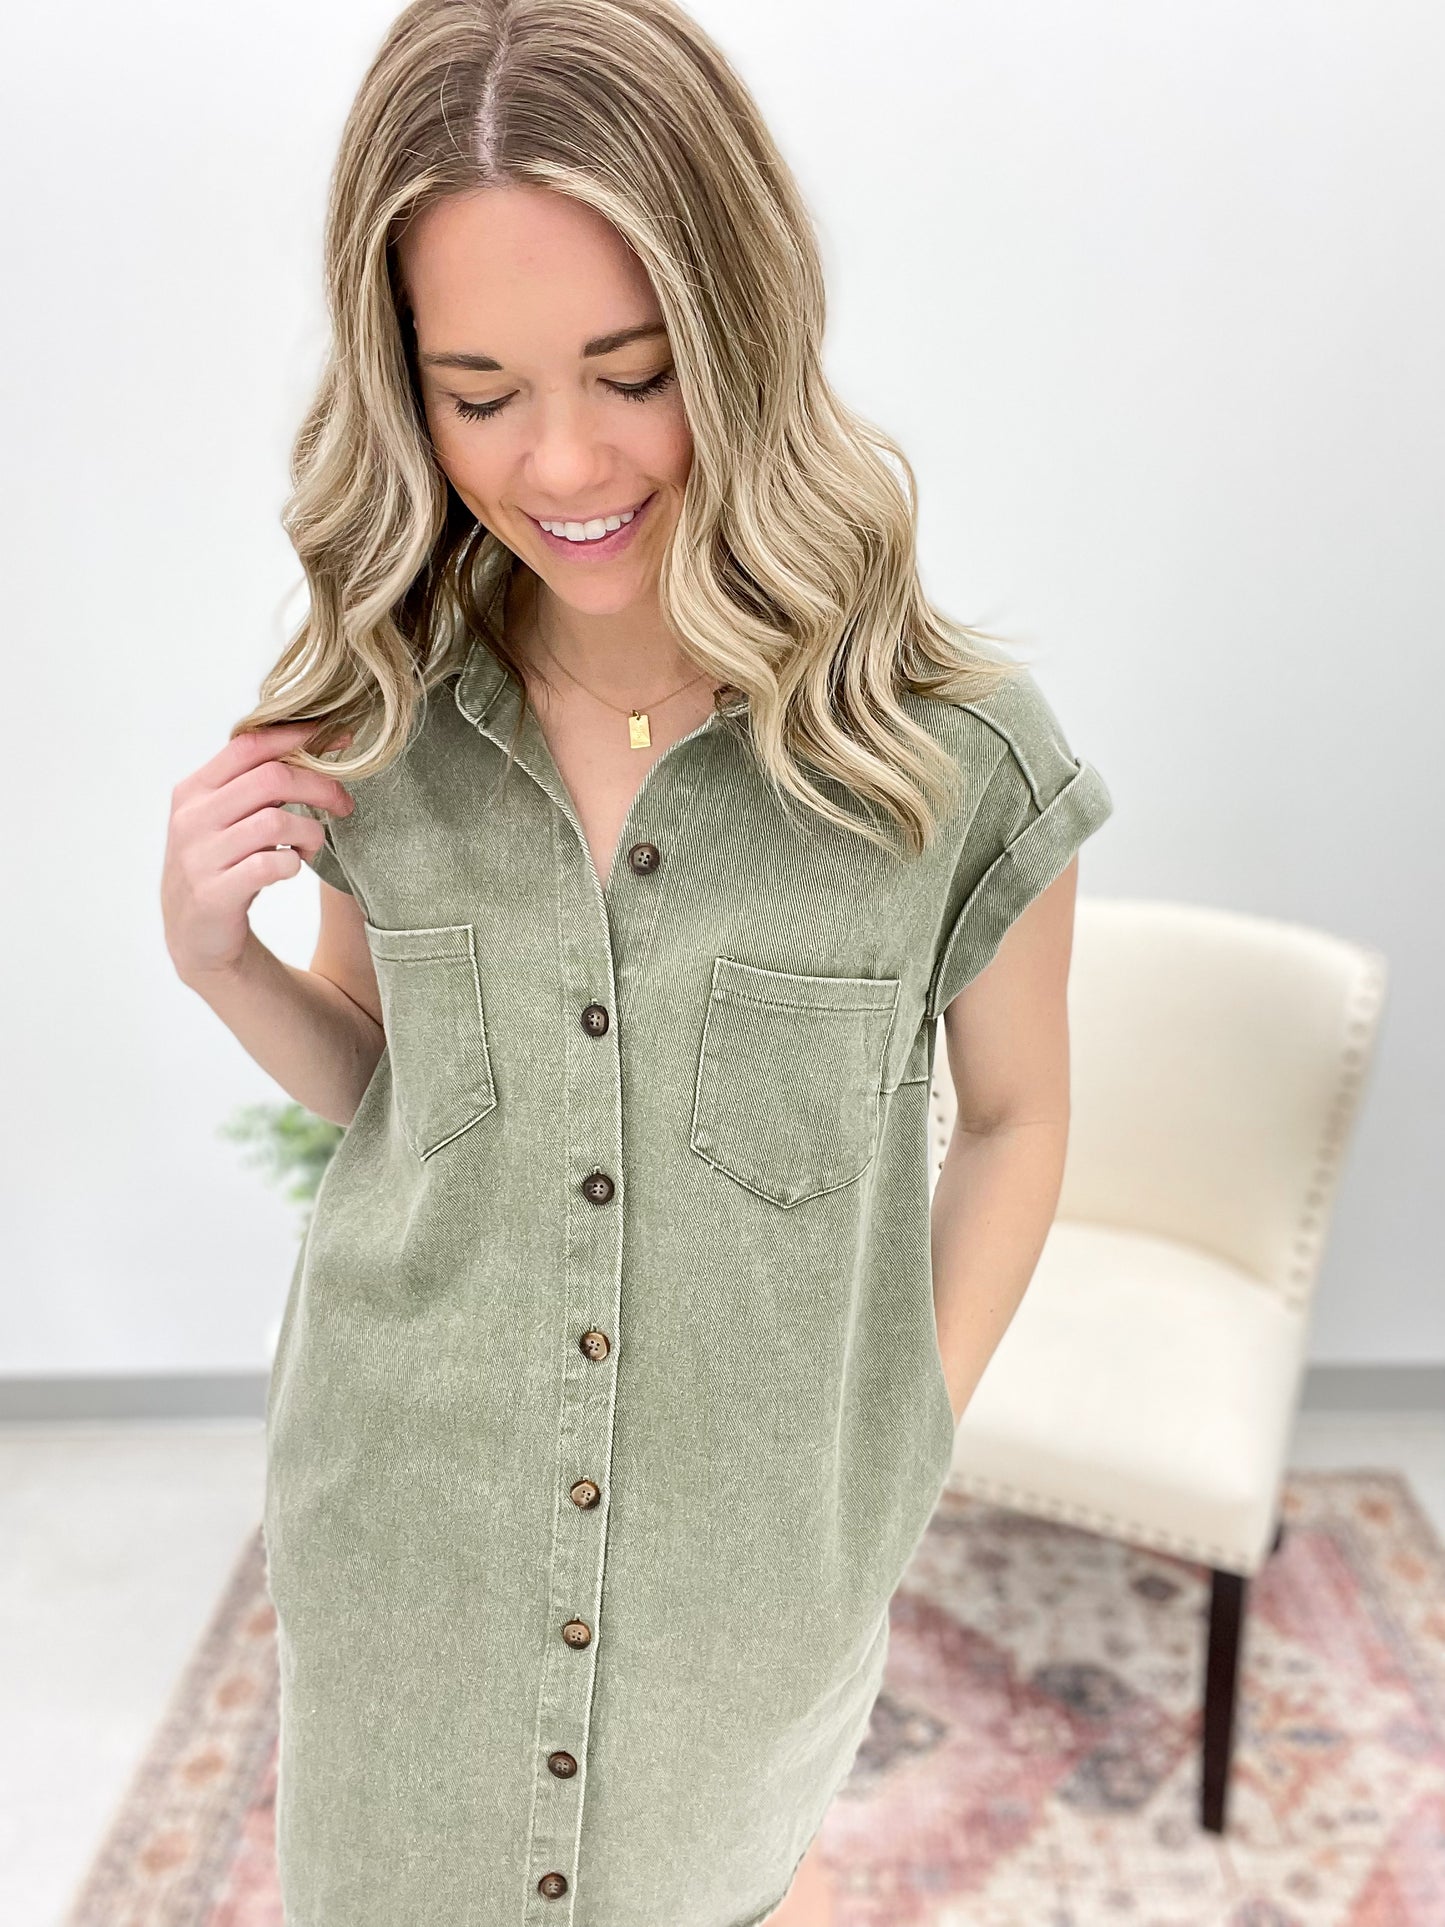 View From Above Denim Dress Olive